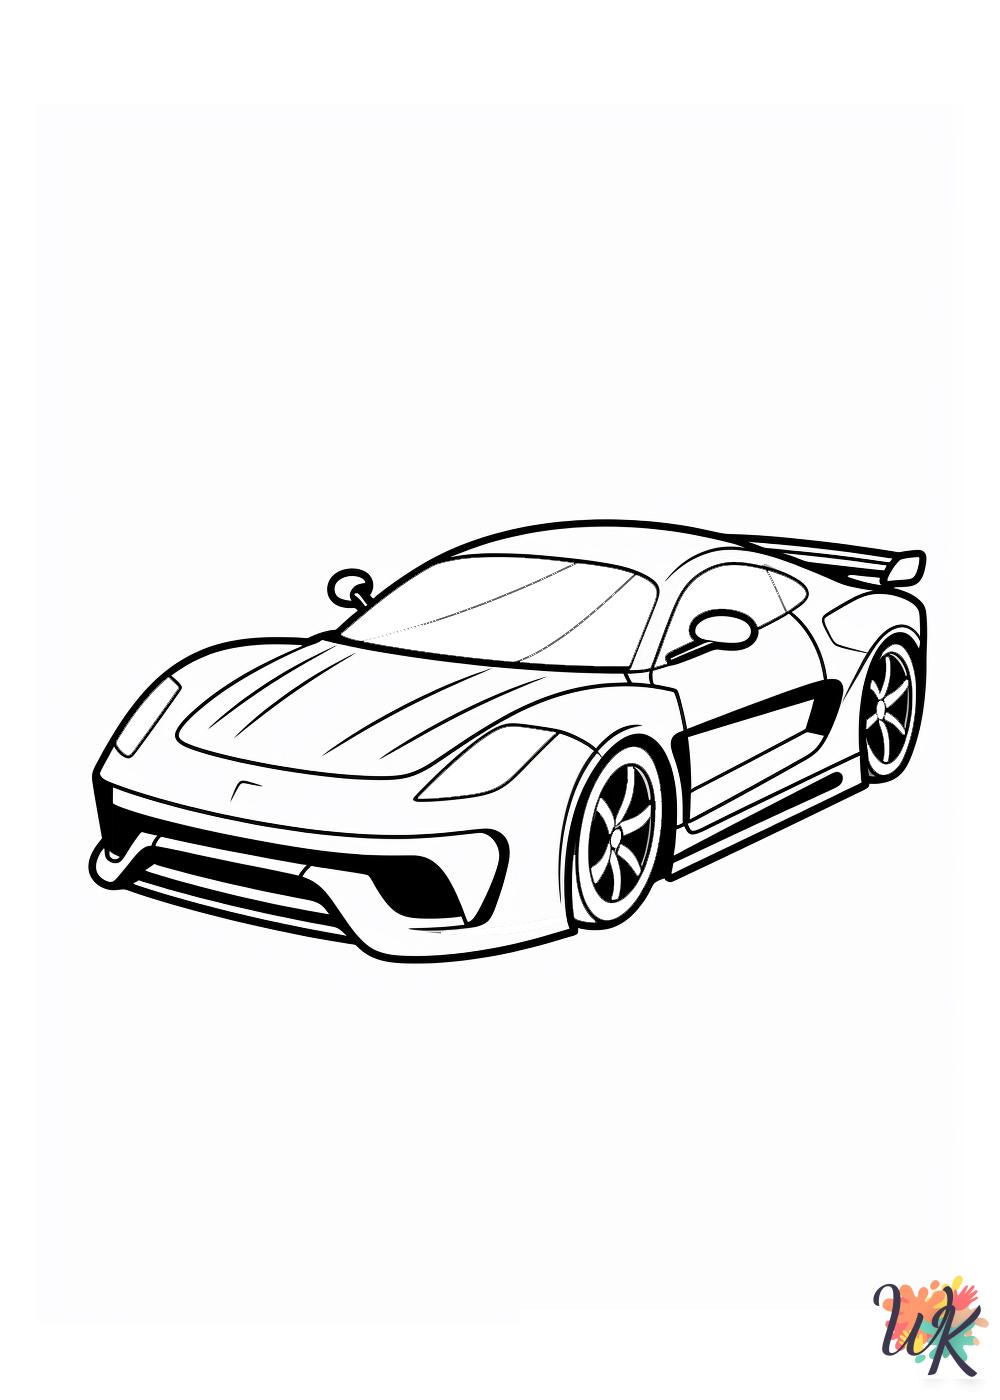 Race Car free coloring pages